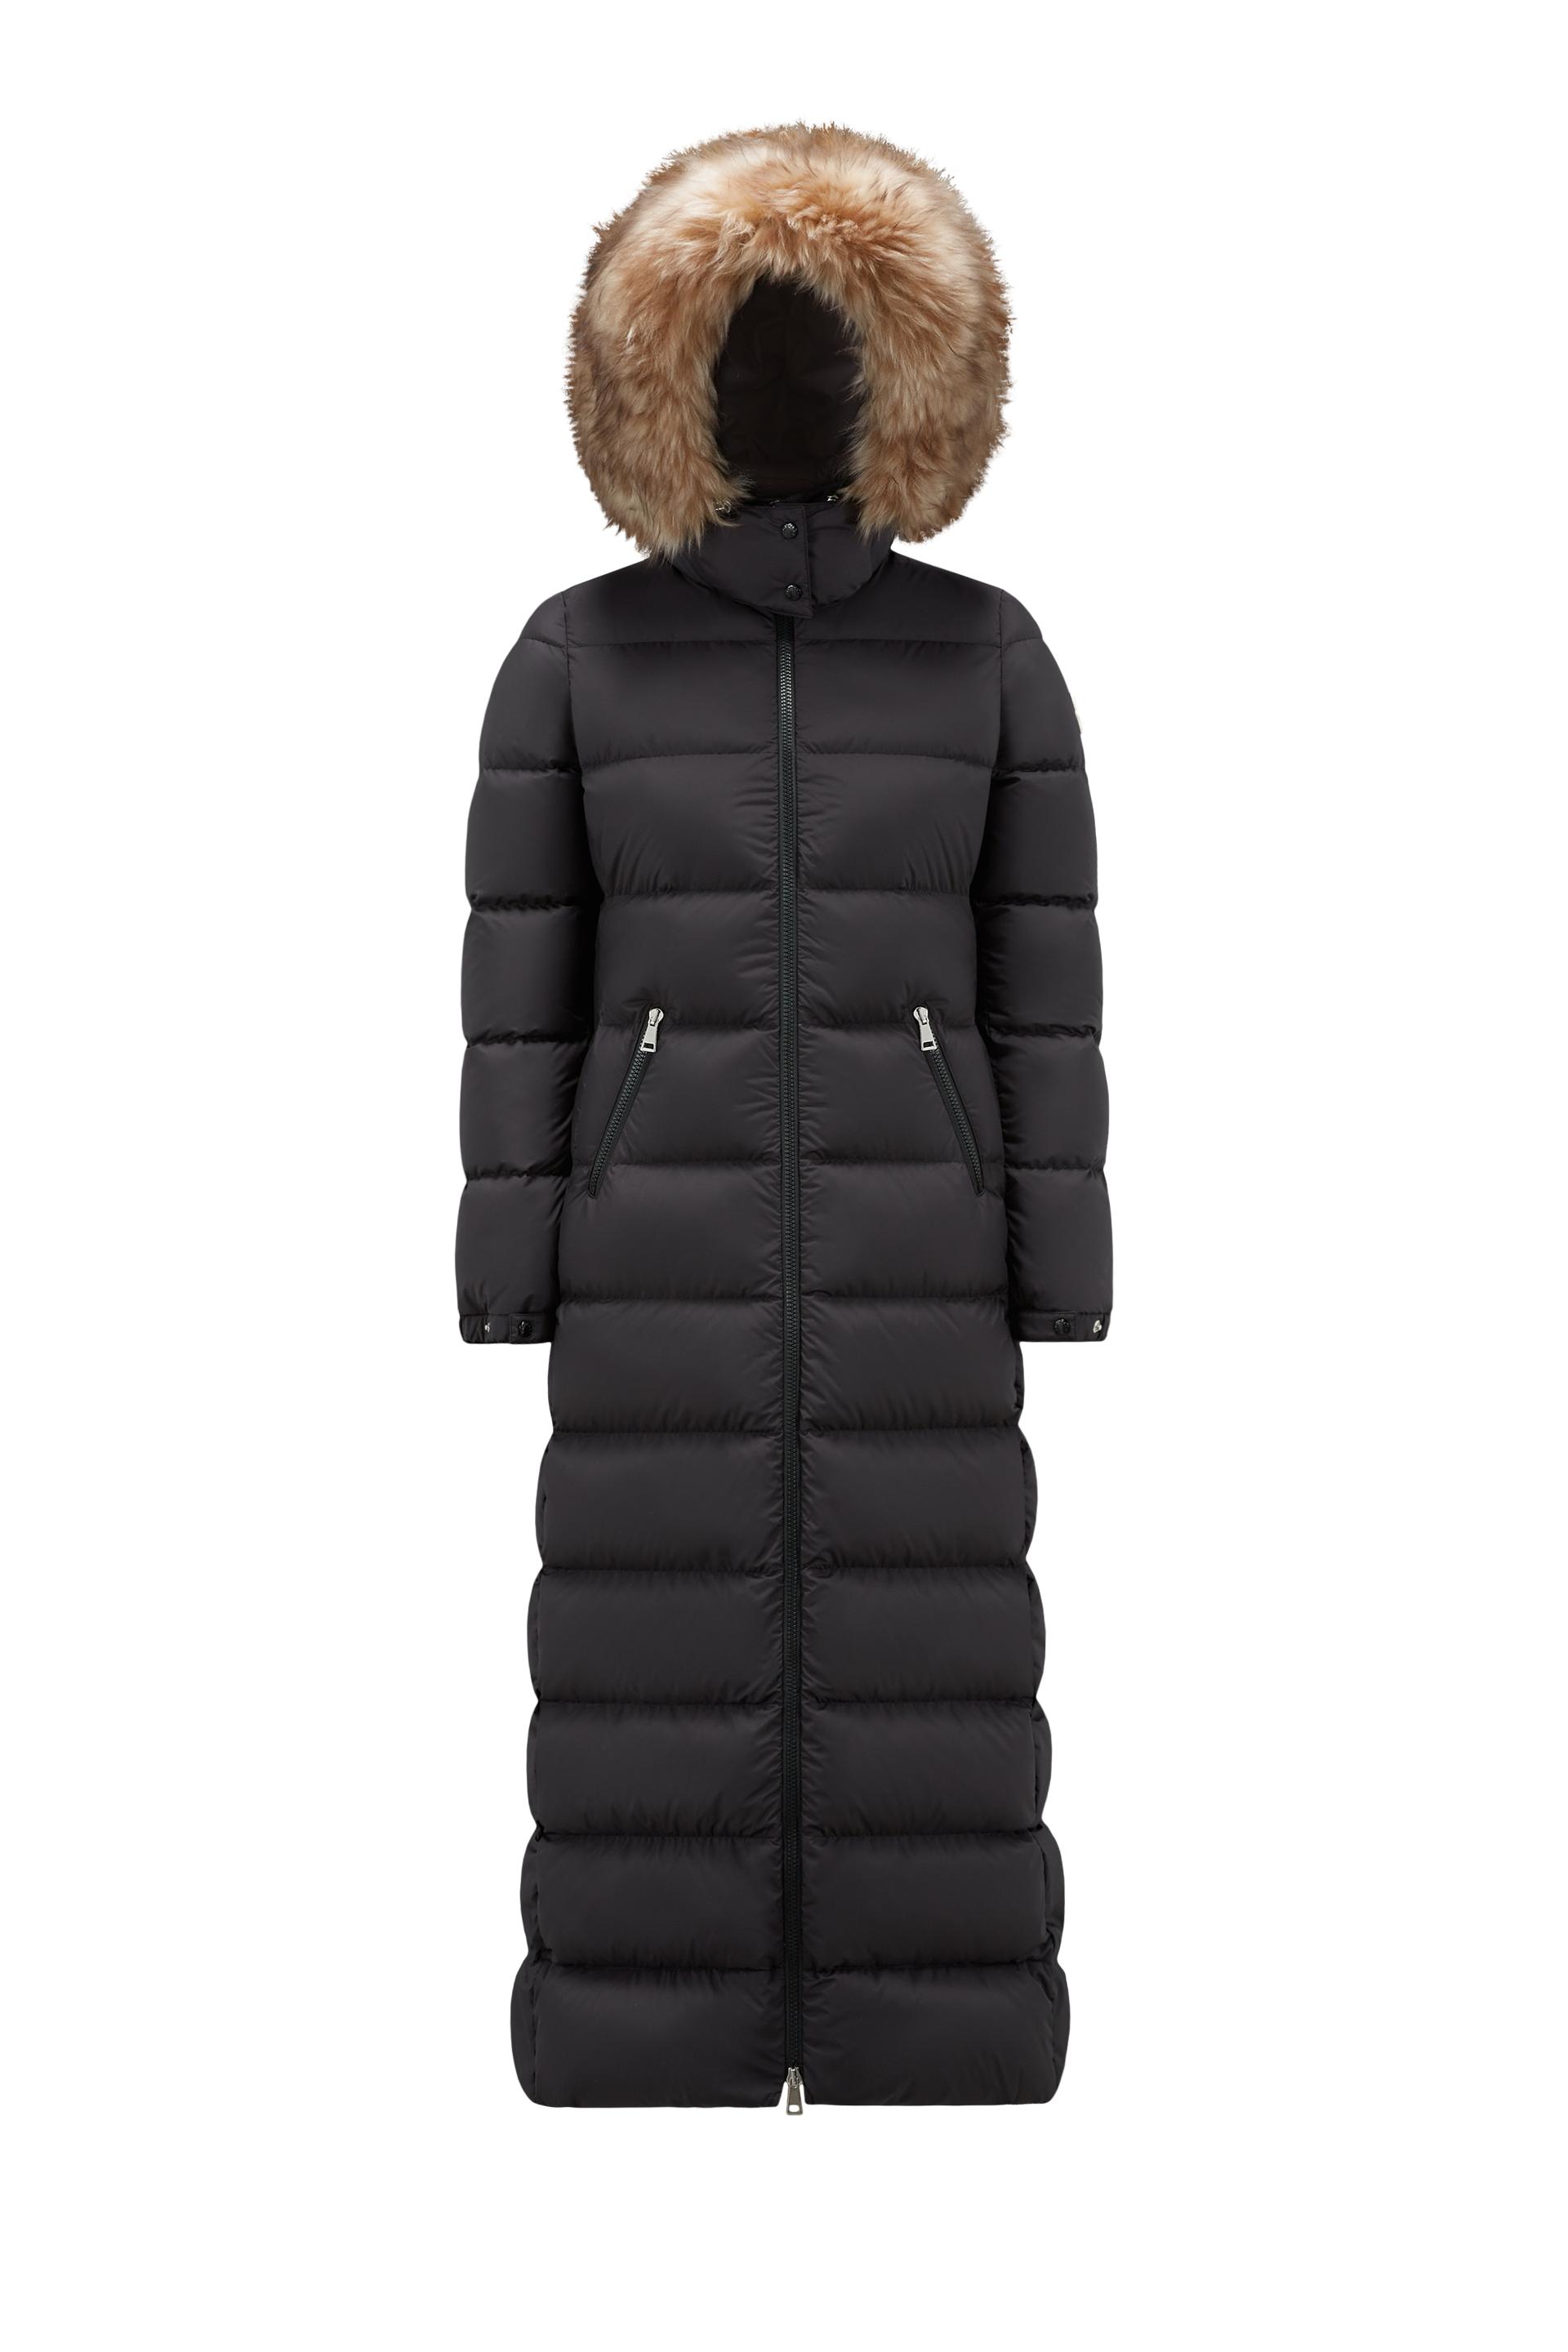 Moncler Fudson Long Down Jacket in Black | Lyst Canada